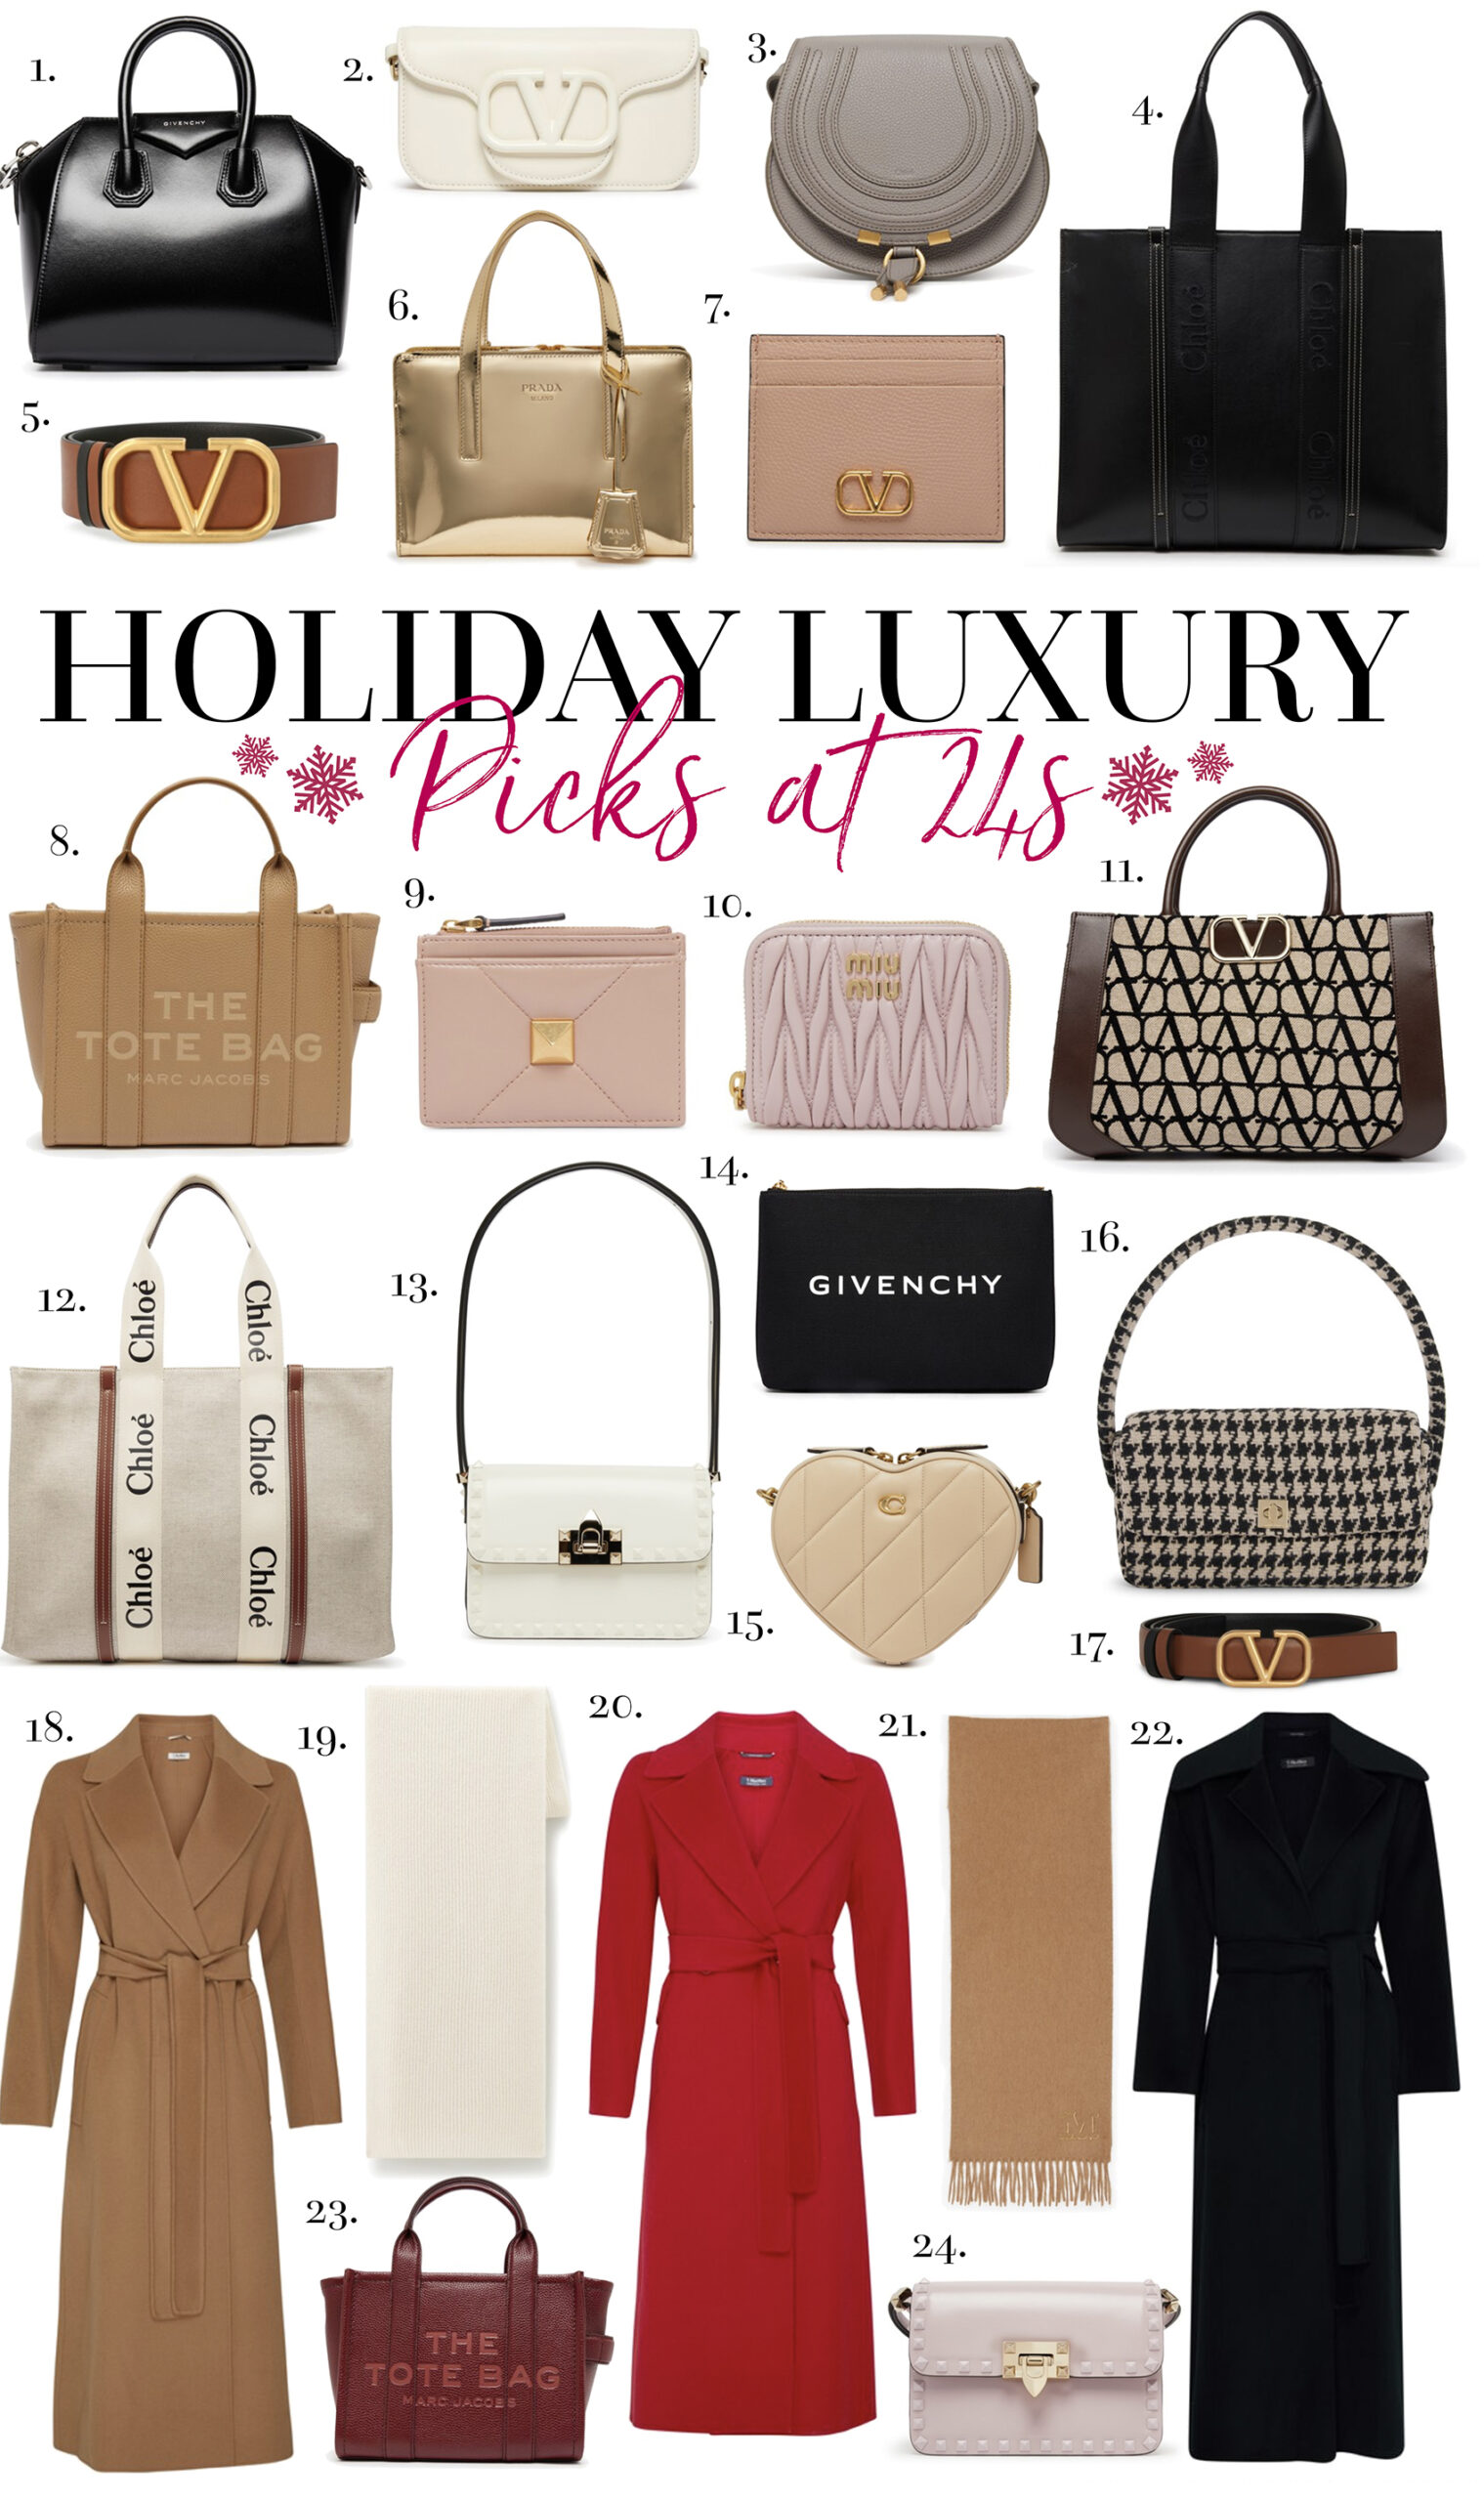 Holiday Luxury at 24s! - Chase Amie